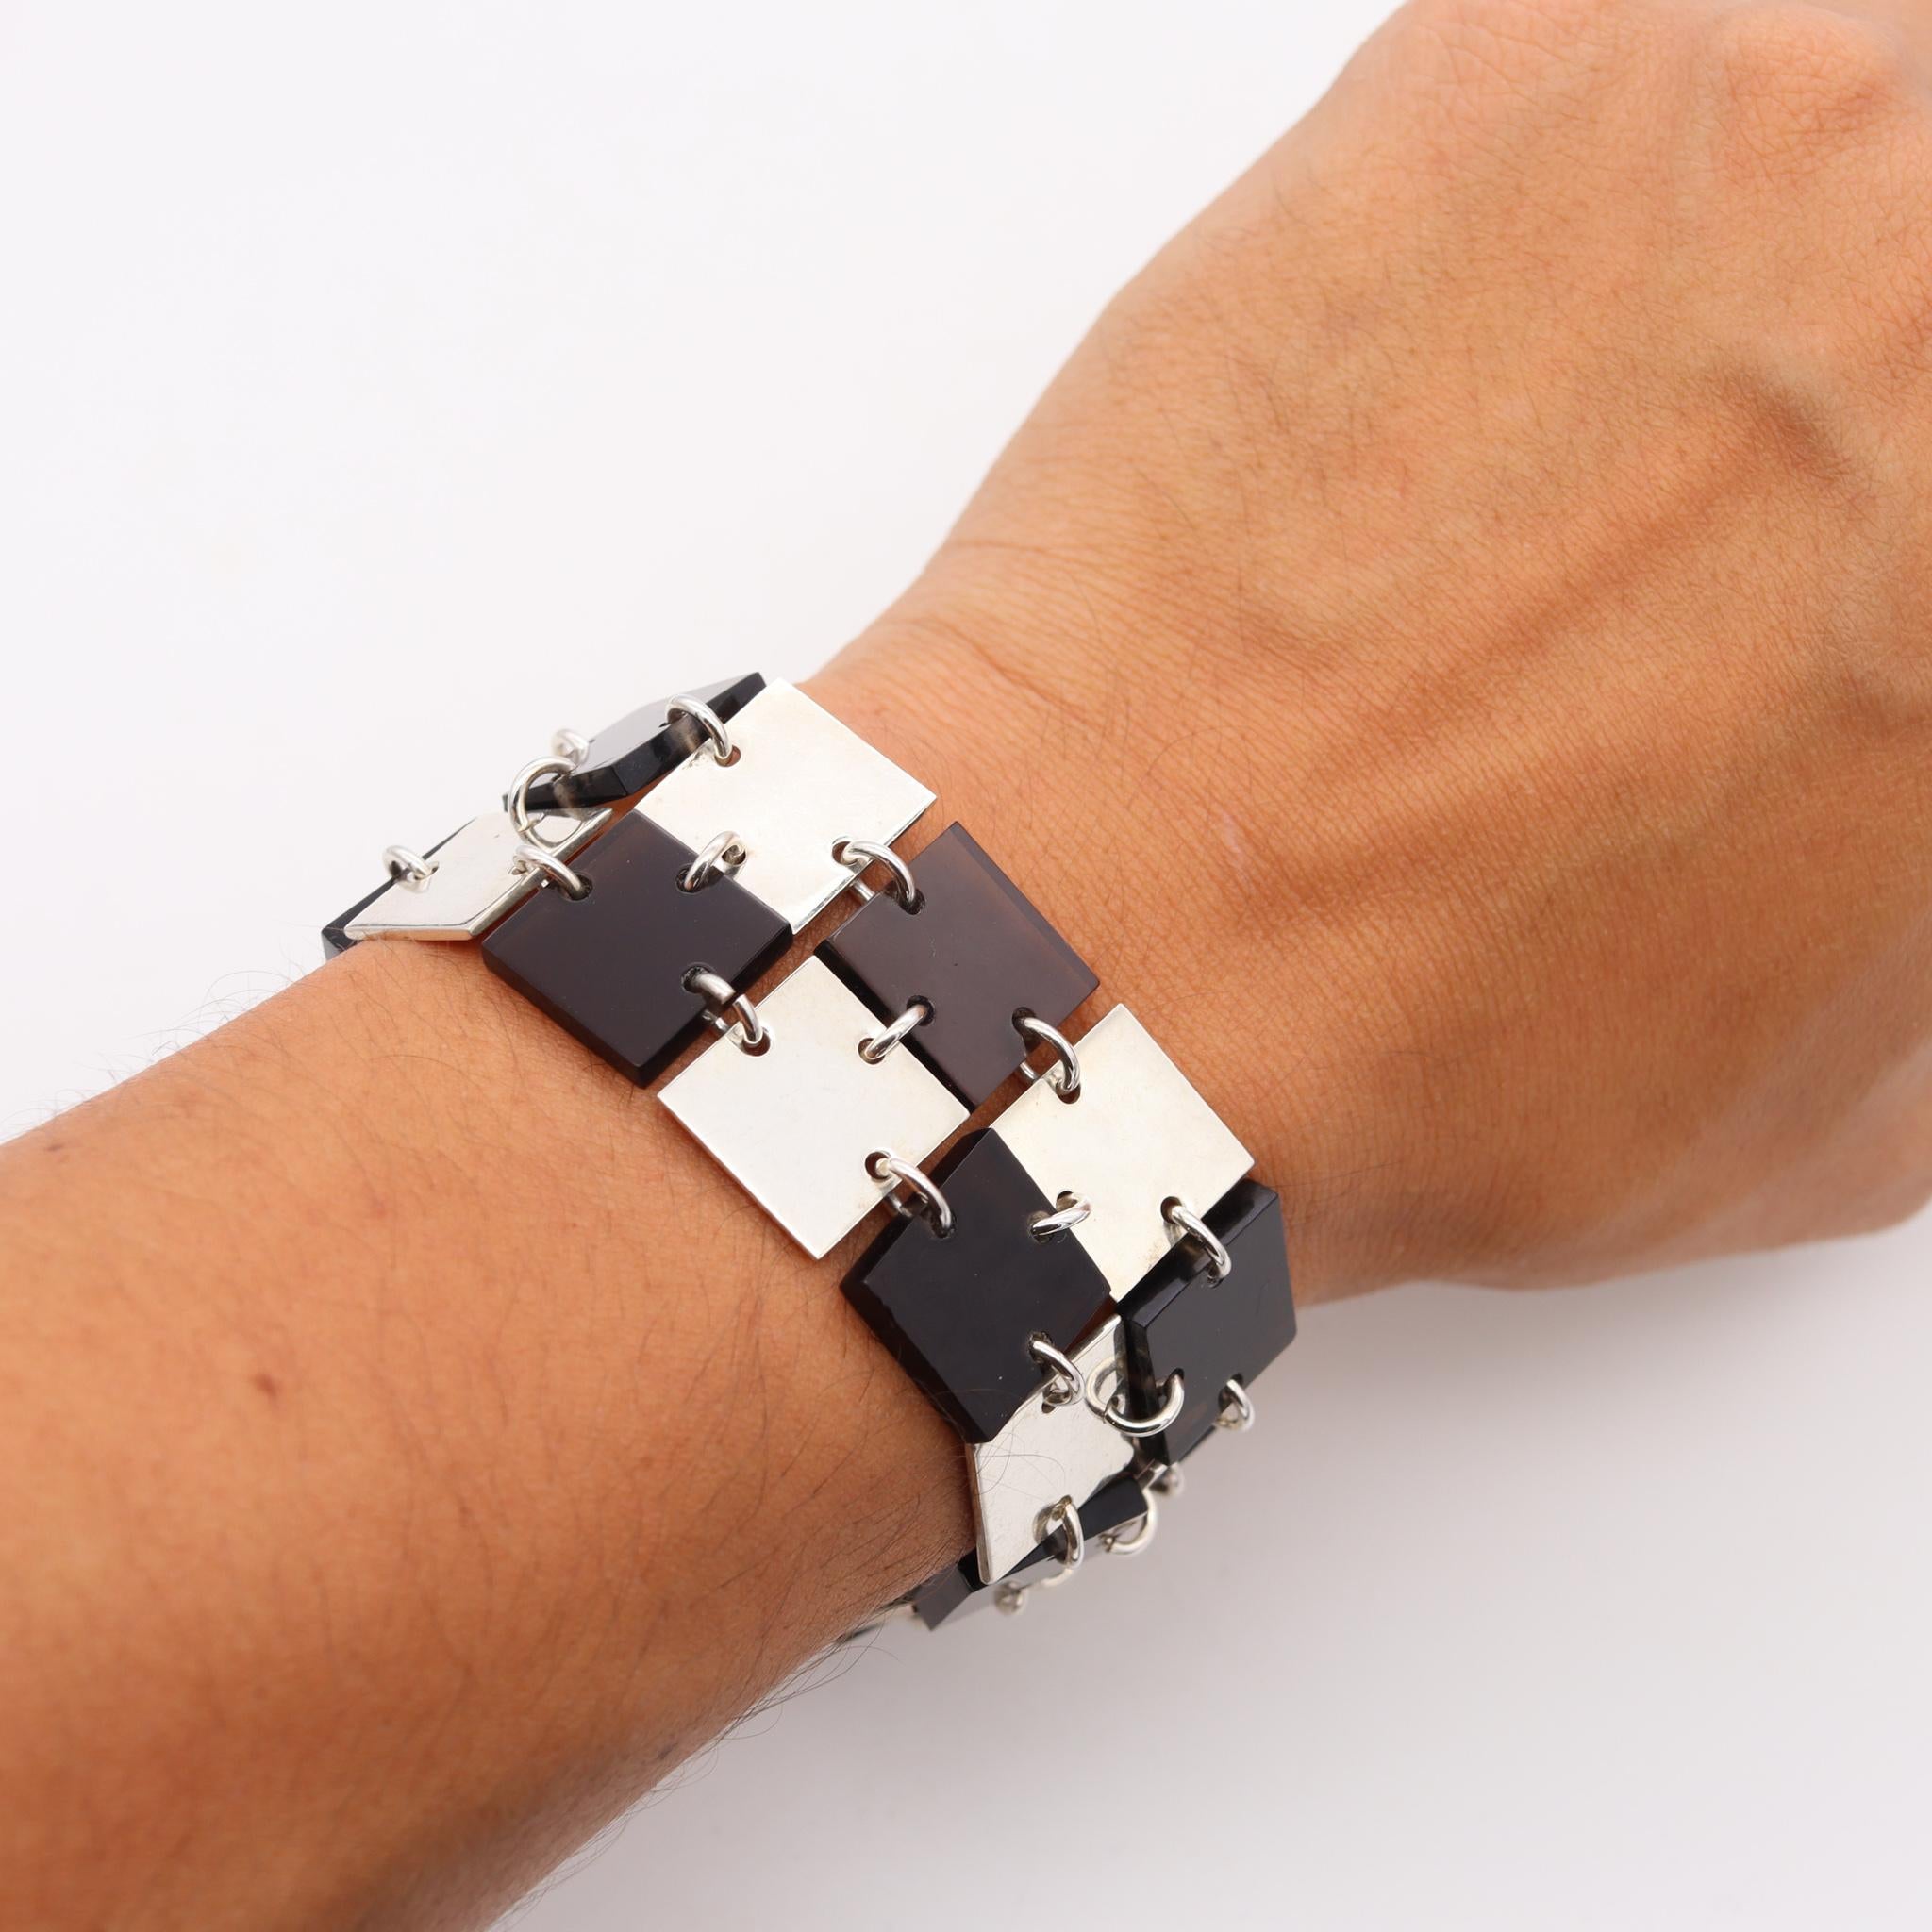 Teresa Gonzalez 1980 Geometric Flexible Bracelet in 925 Sterling Silver & Lucite In Excellent Condition For Sale In Miami, FL